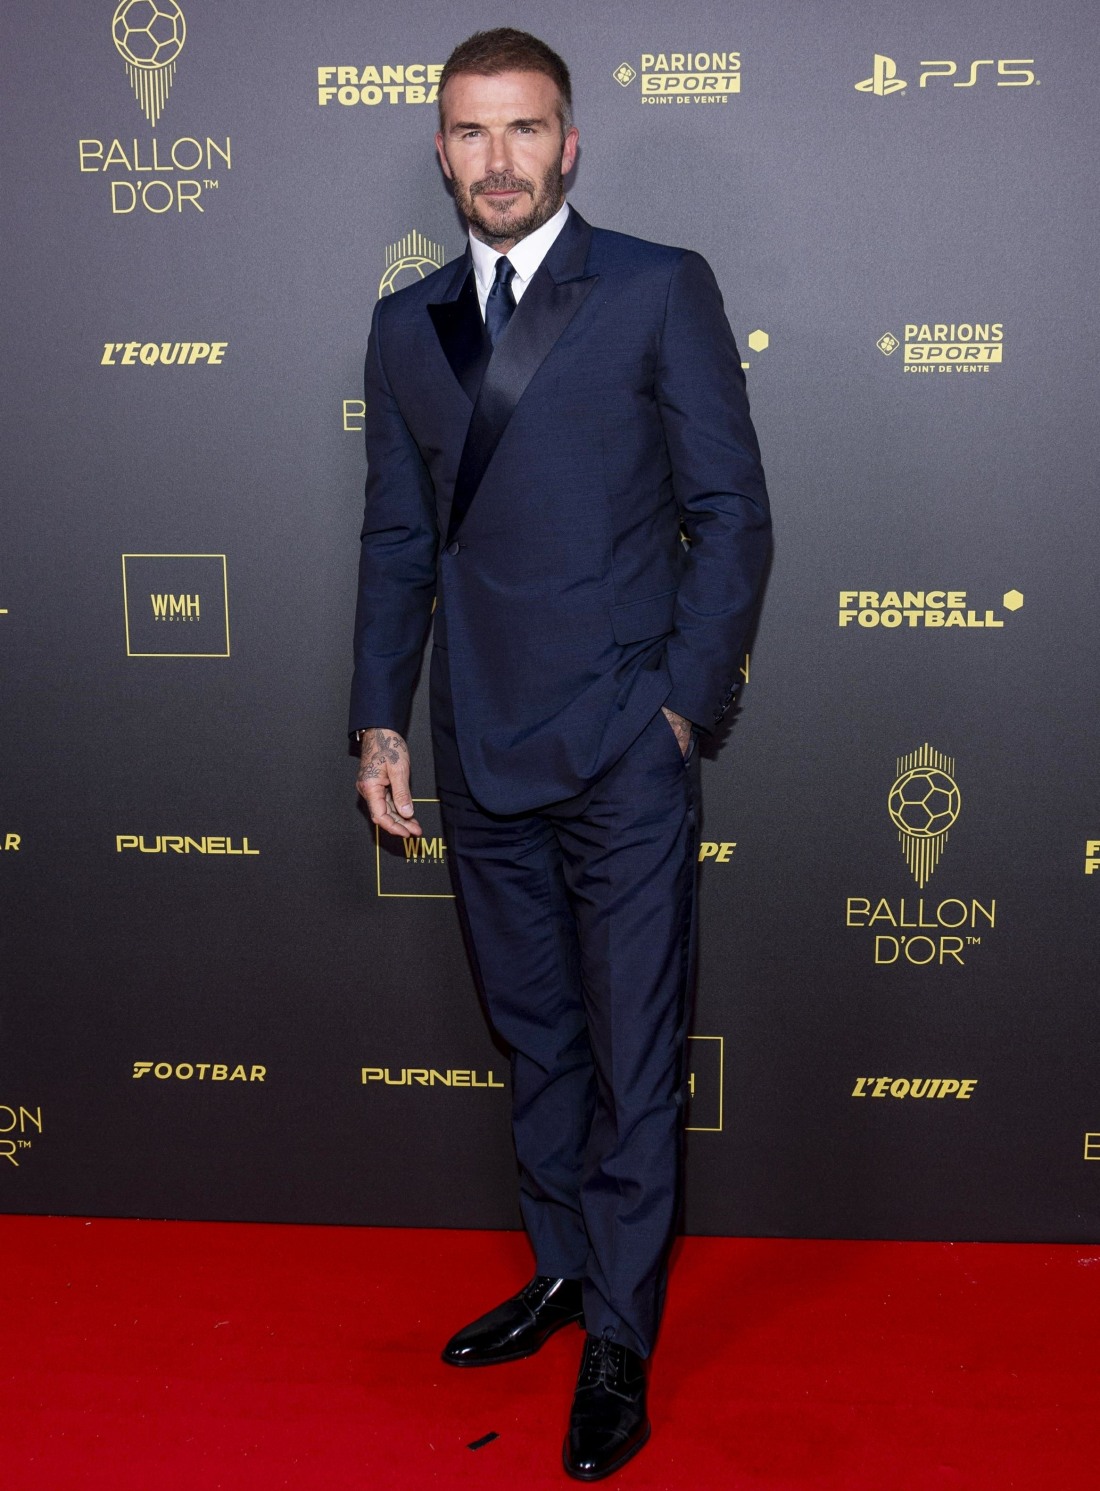 dm:-king-charles-wants-david-beckham-to-be-part-of-the-prince’s-foundation-rebrand?